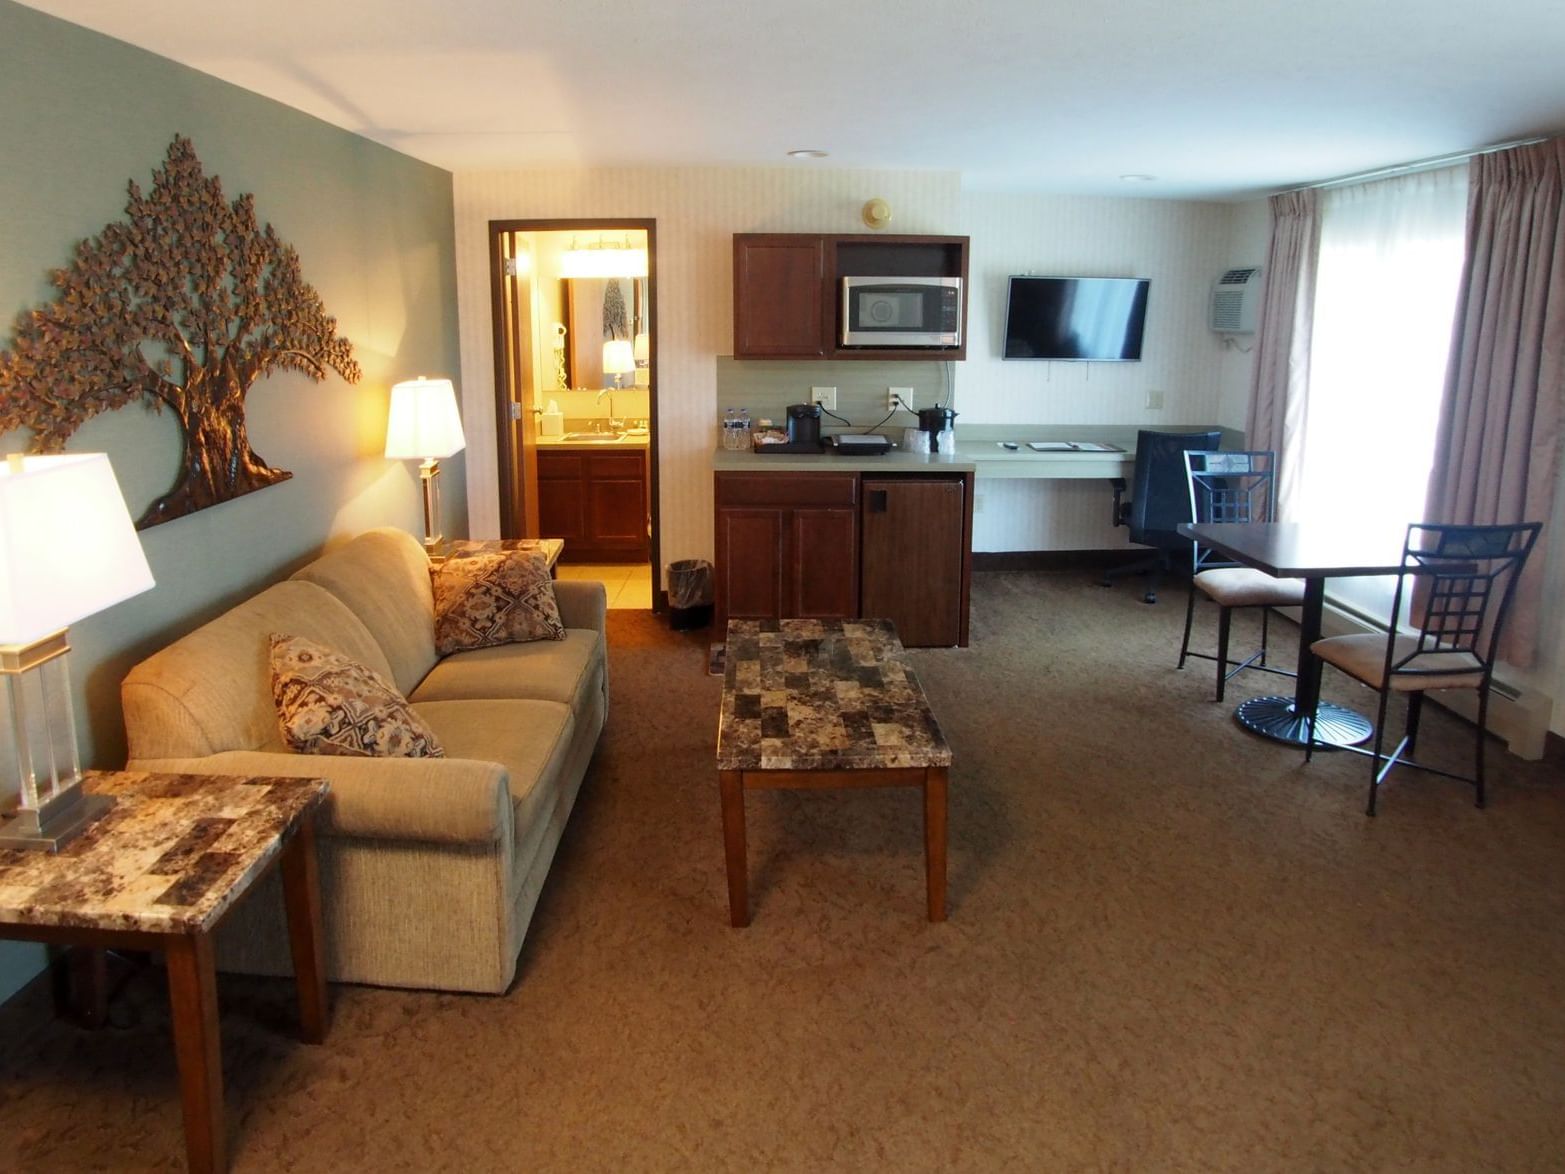 Kitchenette & lounge area in Deluxe Suite at Evergreen Resort